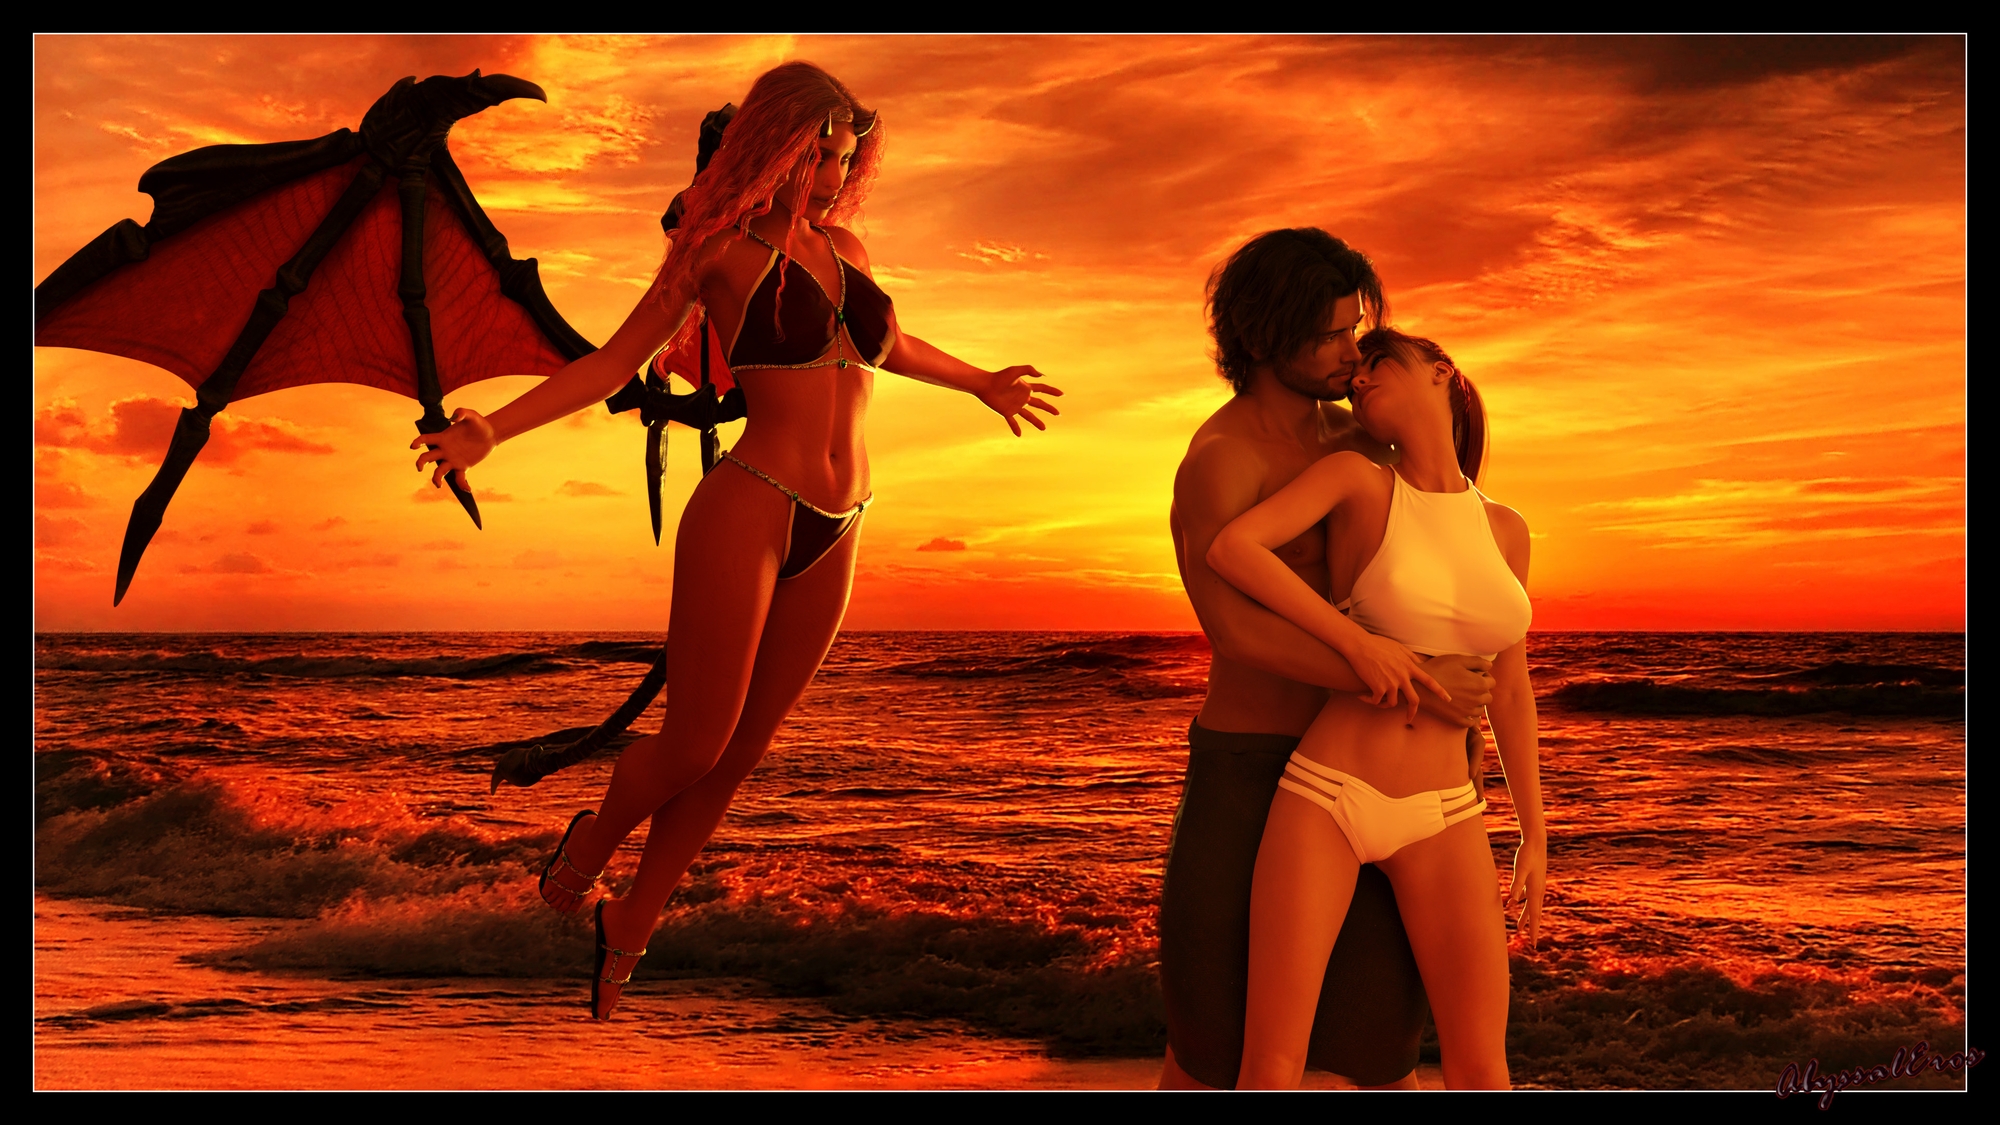 It’s summertime  and even Succubi enjoy a leisurely stroll at the beach — until they happen to stumble on a couple in love with naughty minds.

But that  my dears  is a story to be told another time.